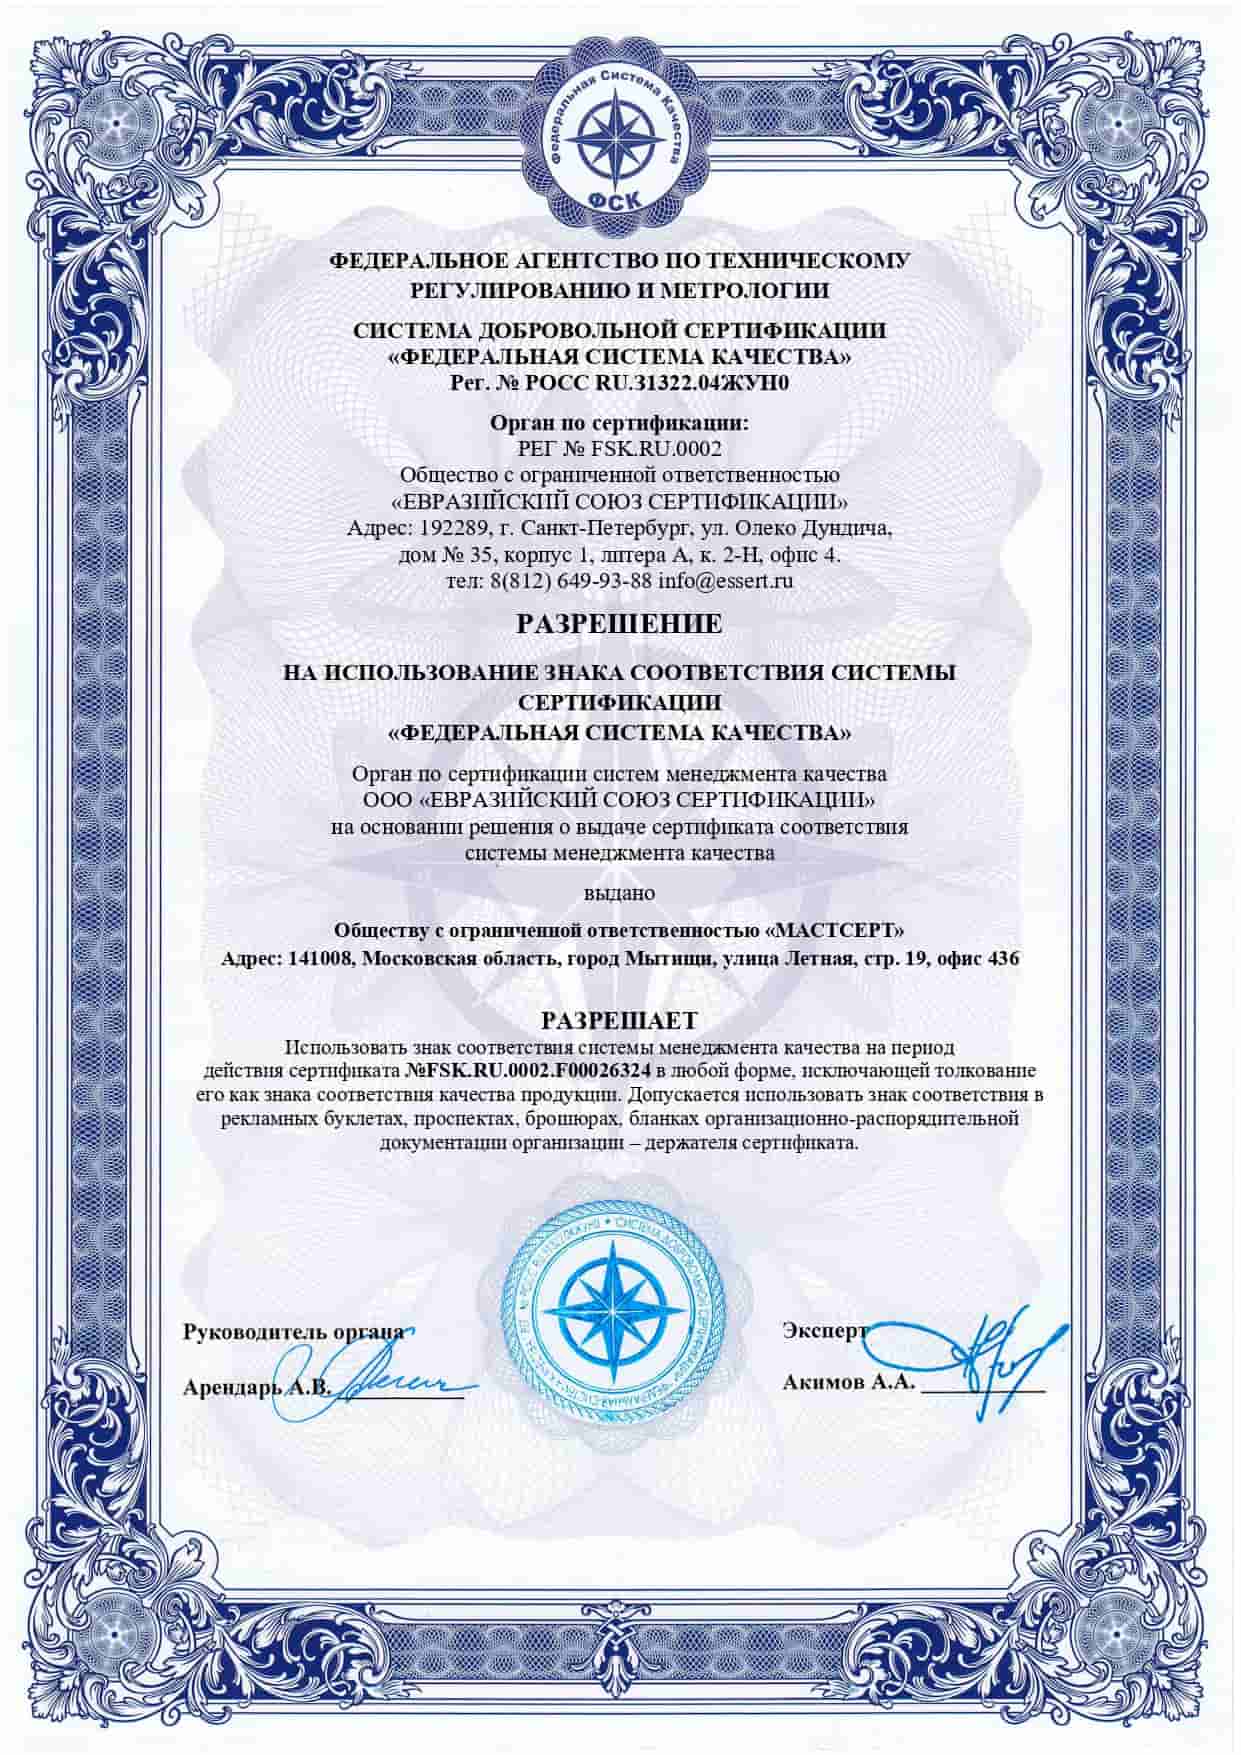 Authorization to use the mark of conformity ISO 9001